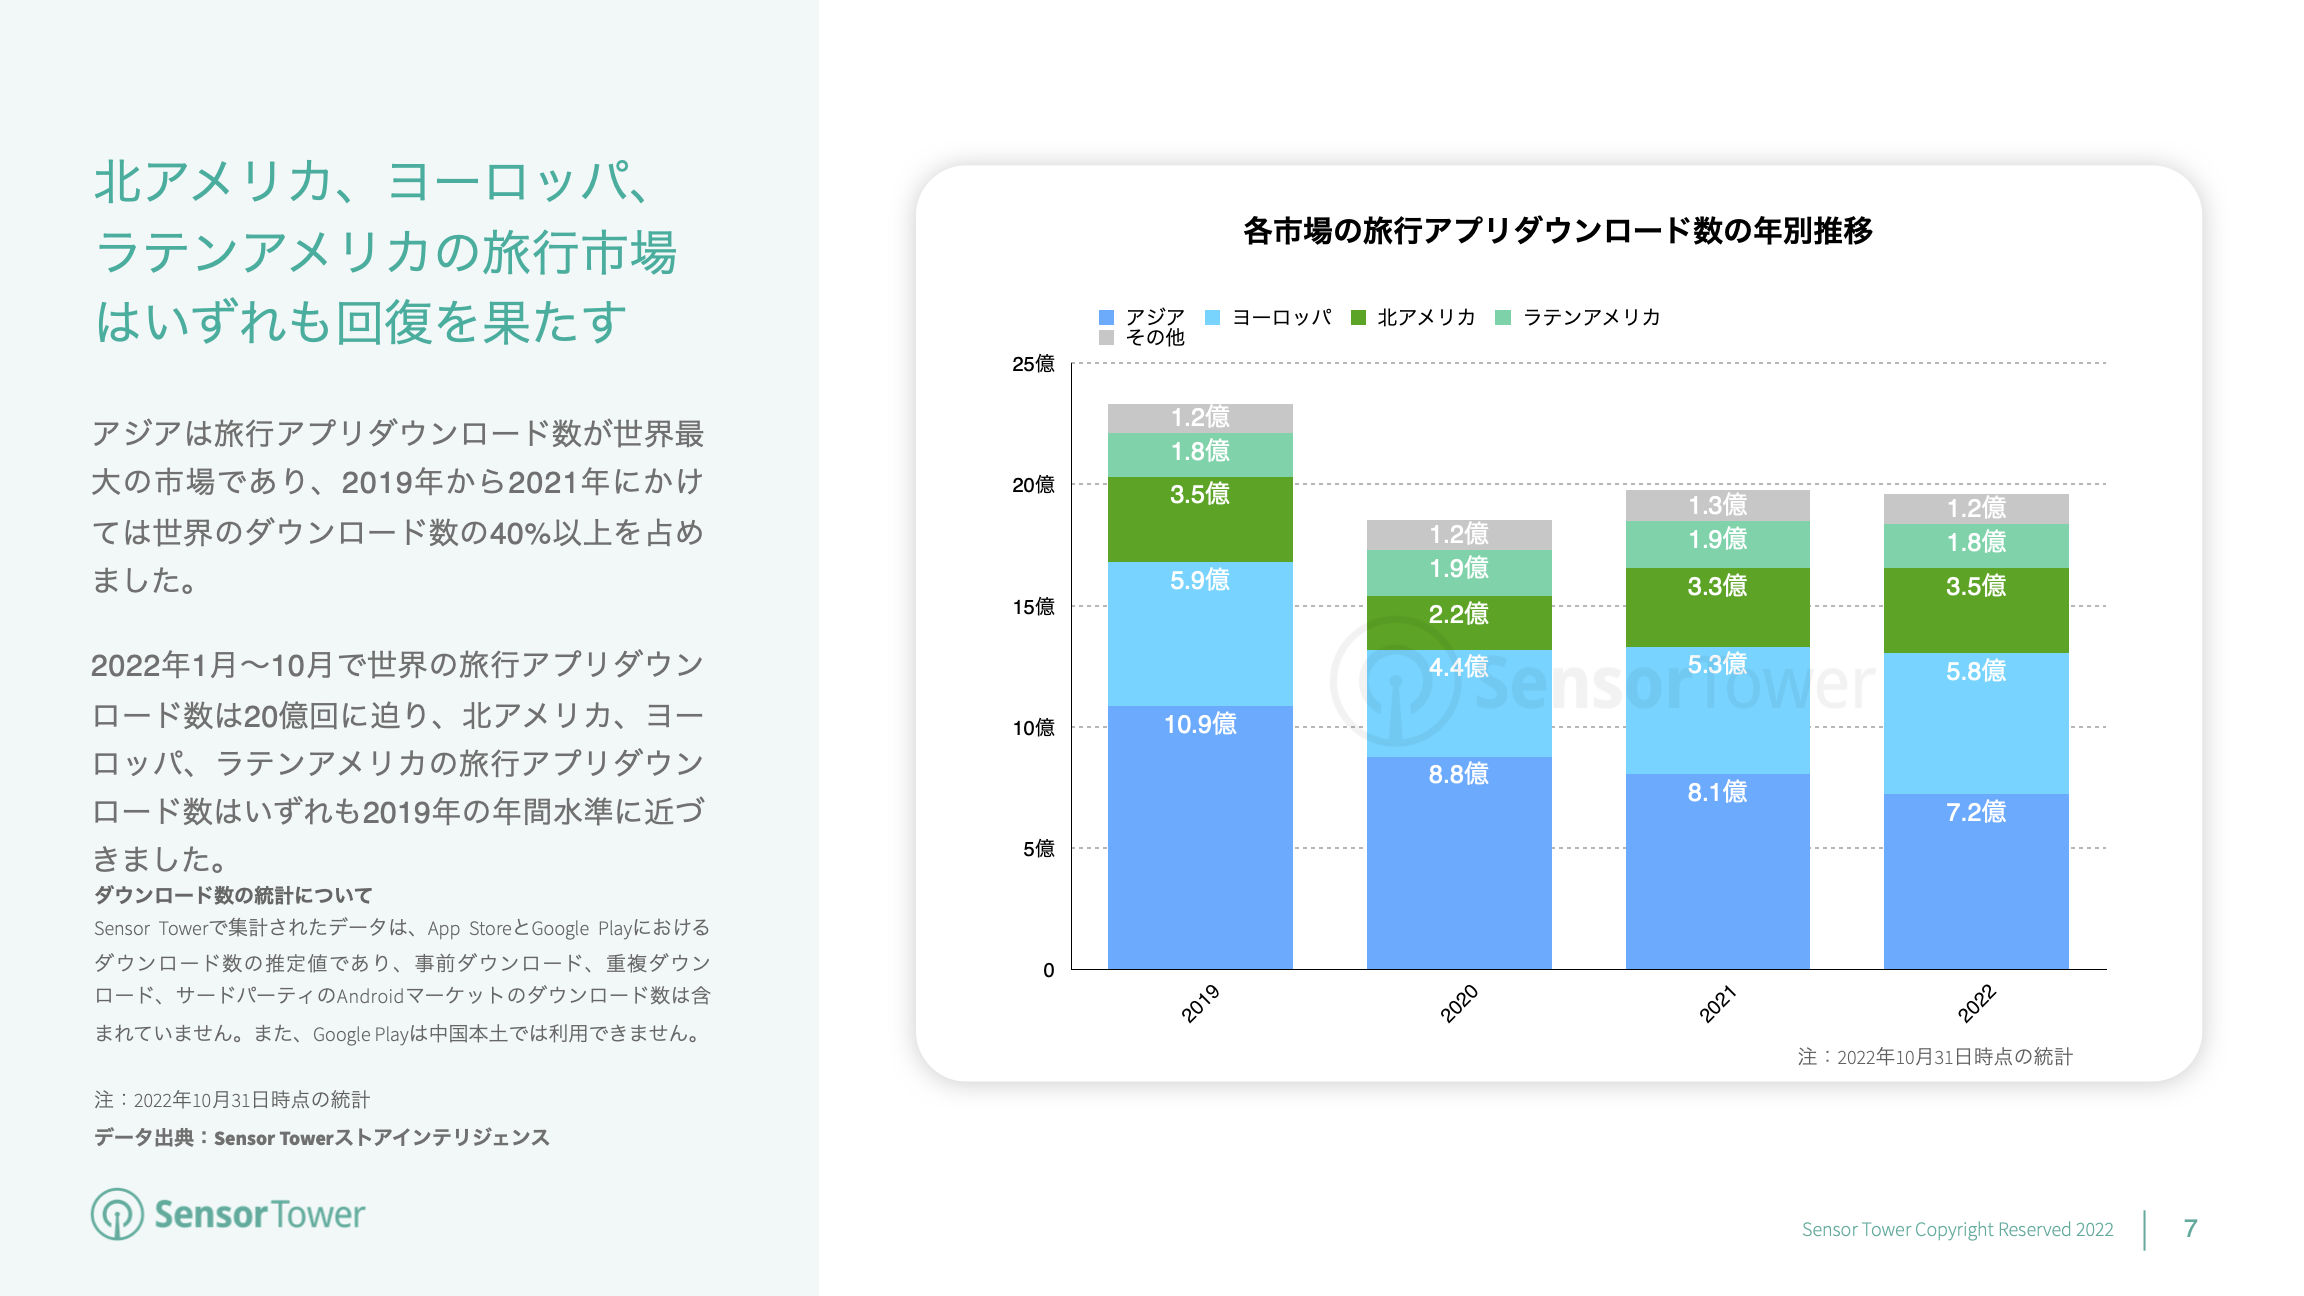 -JP- State of Travel Apps 2022 Report(pg7)